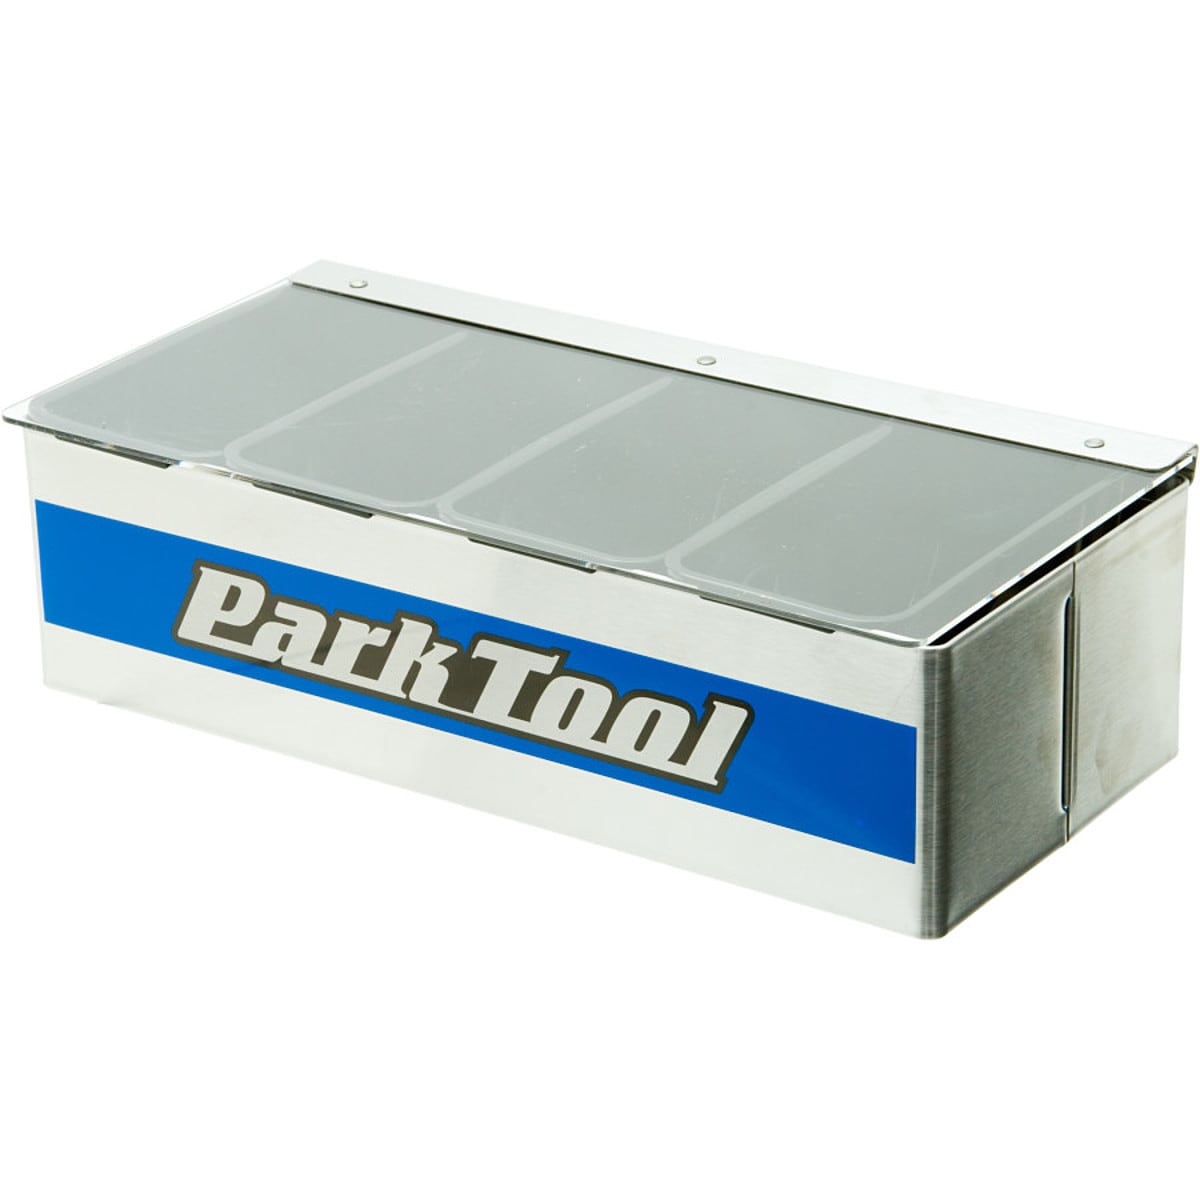 Park Tool JH-1 Bench Top Small Parts Holder One Color, One Size